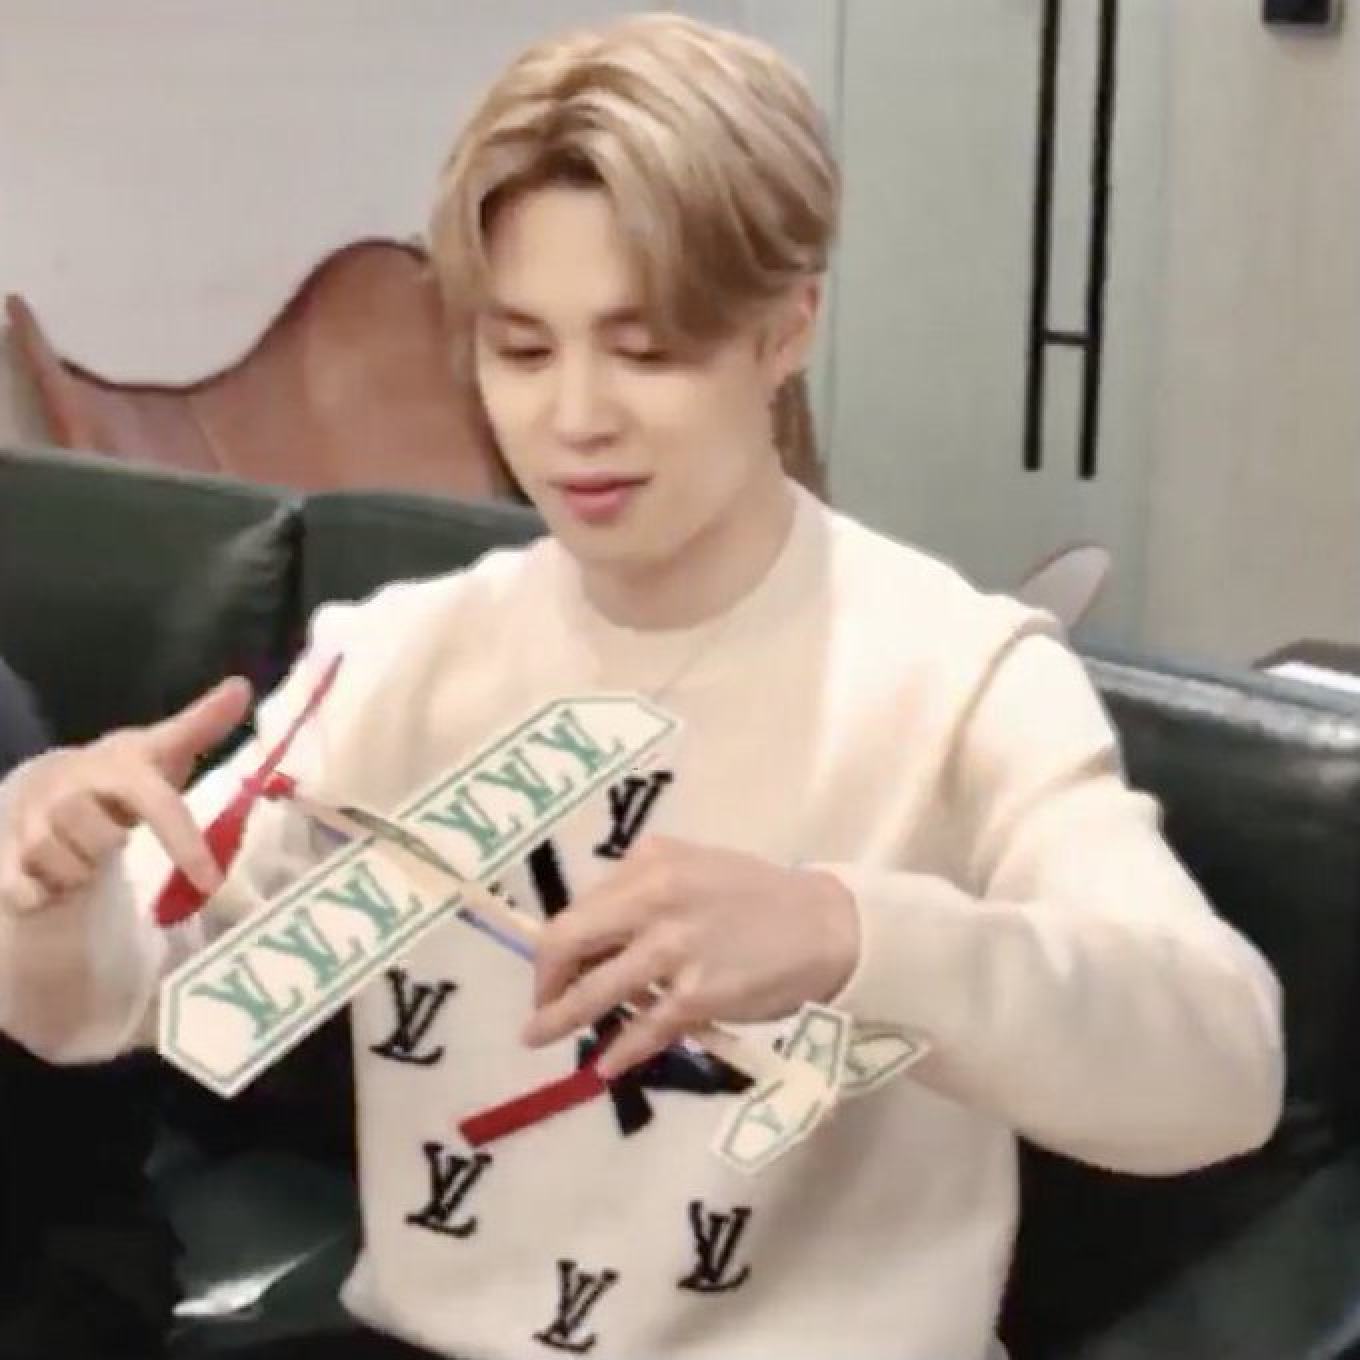 BTS's Jimin Sold Out This Louis Vuitton Outfit Instantly